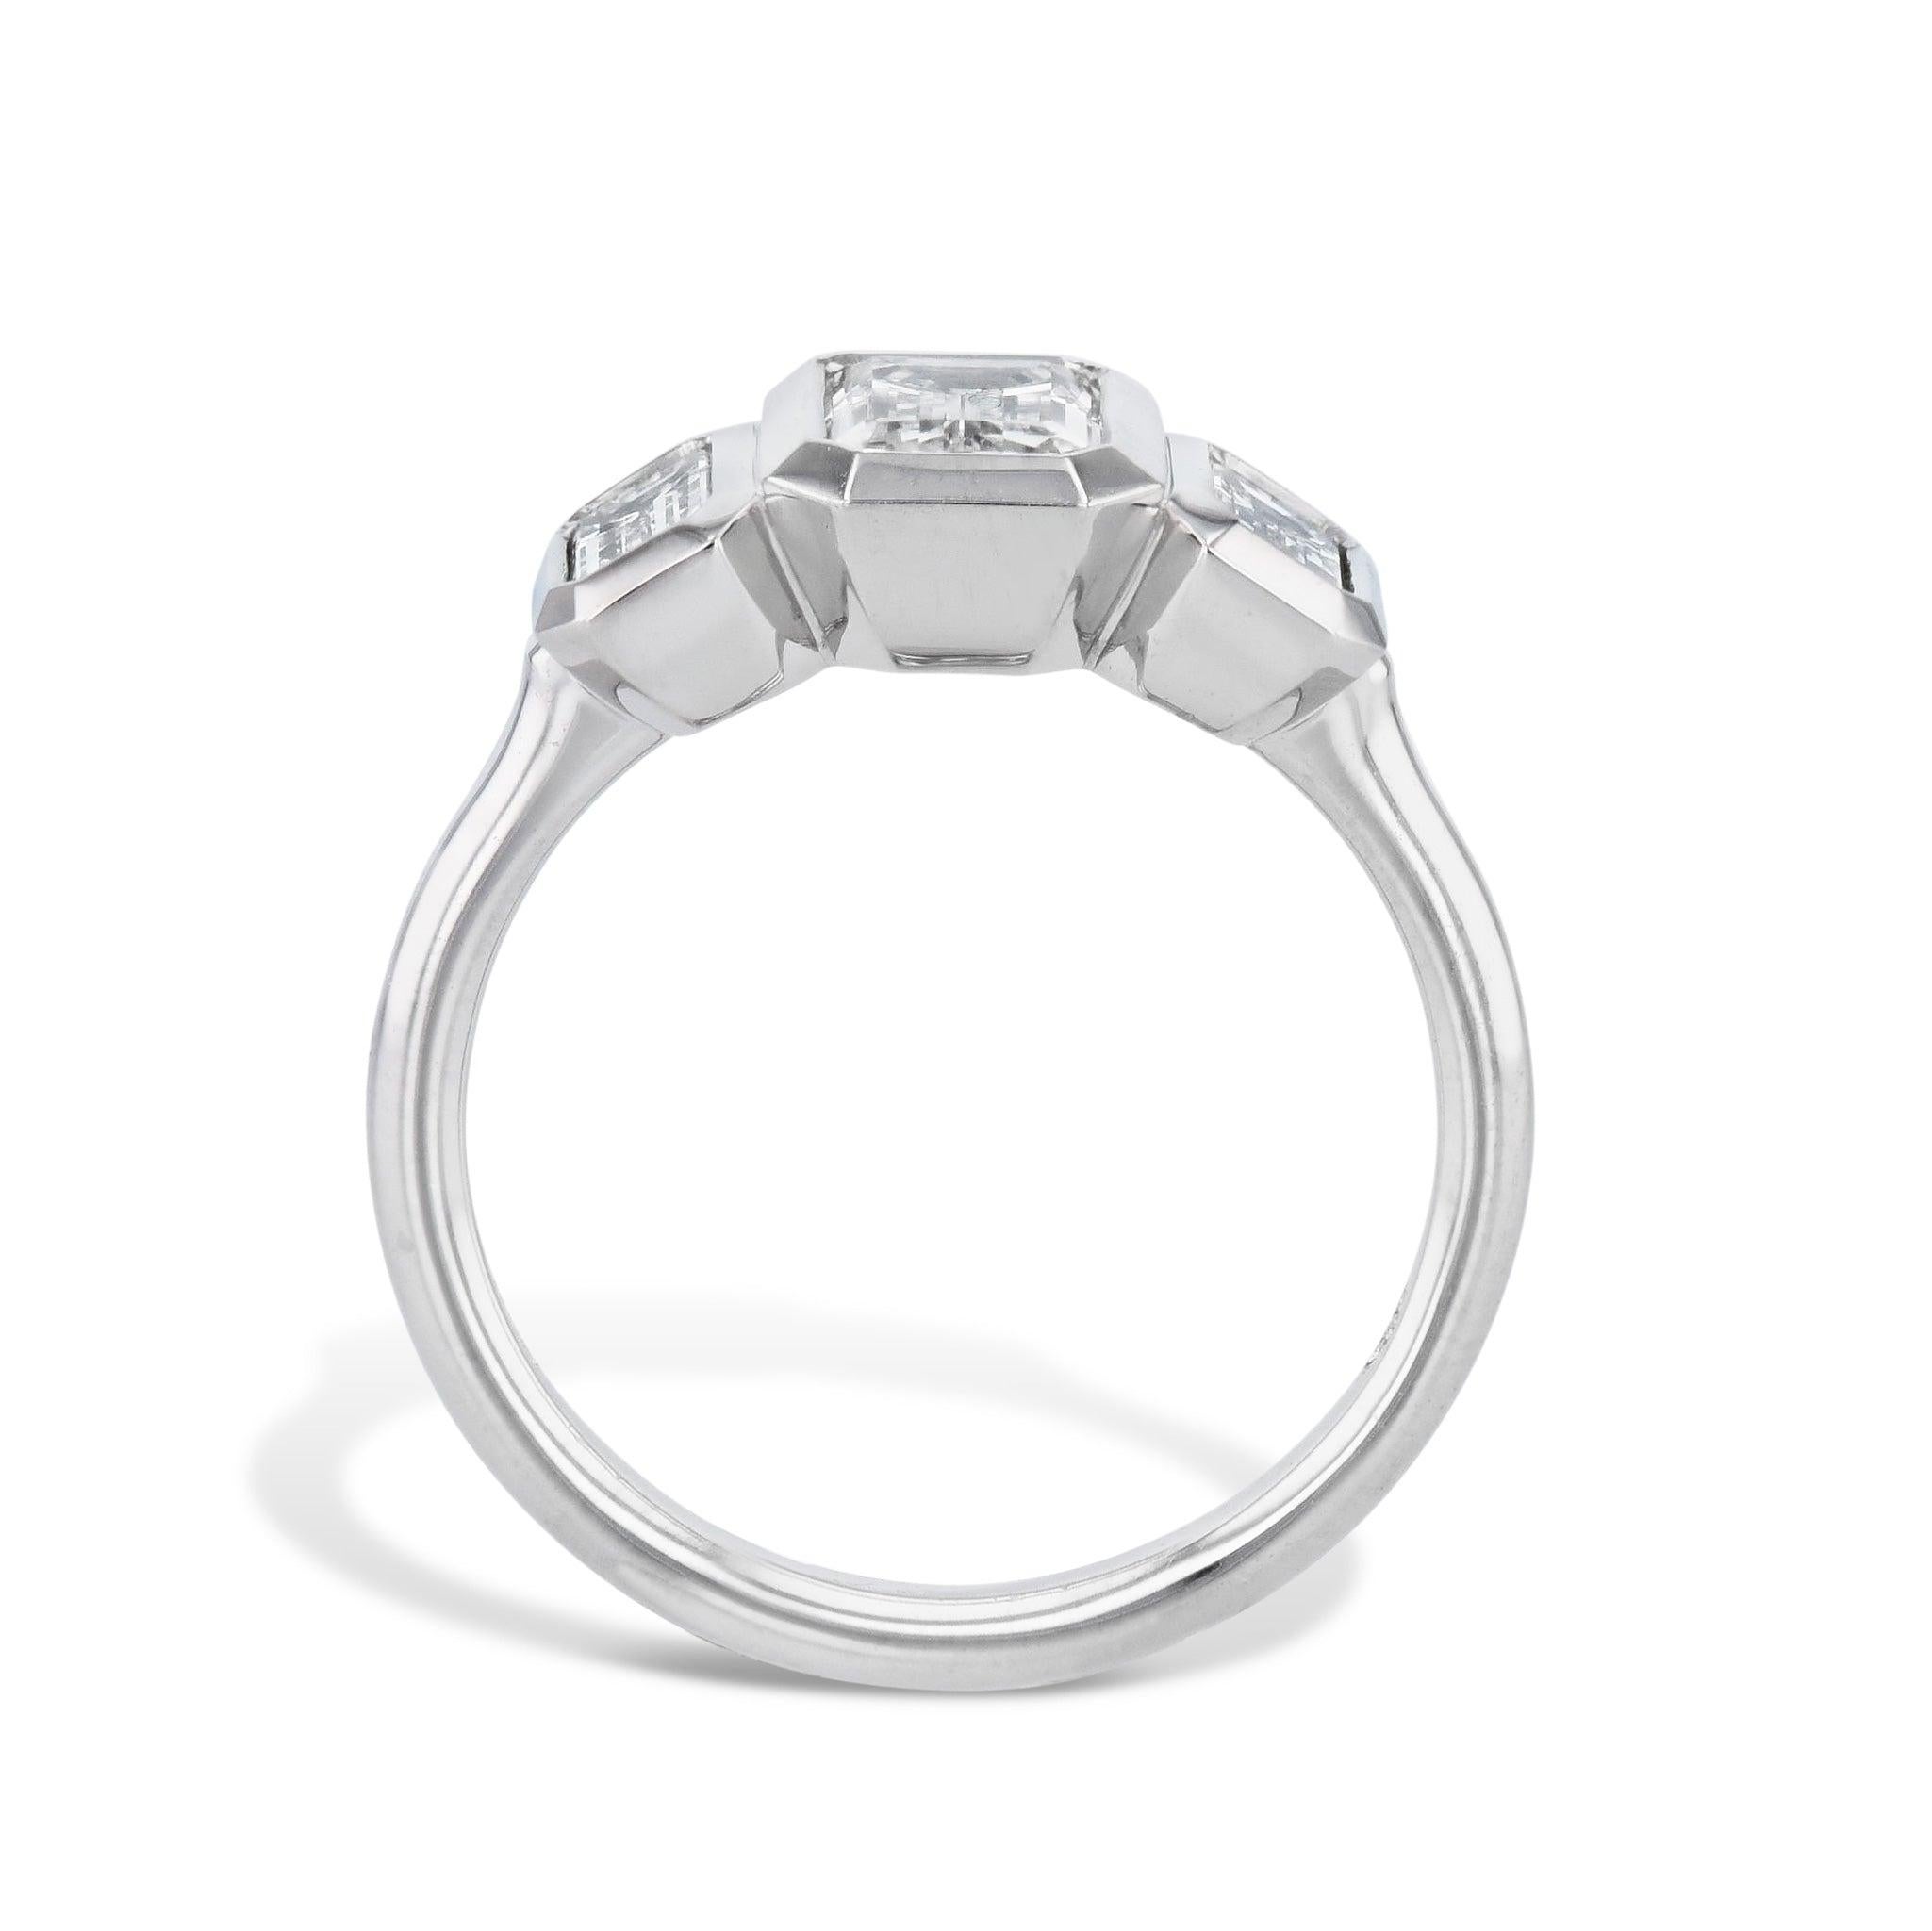 This precious engagement ring features a brilliant Emerald cut diamond set in pure platinum. Flanking the center diamond are two stunning emerald cut diamonds. Handmade from the H&H Collection. Fall in love with this Emerald Cut three Diamond